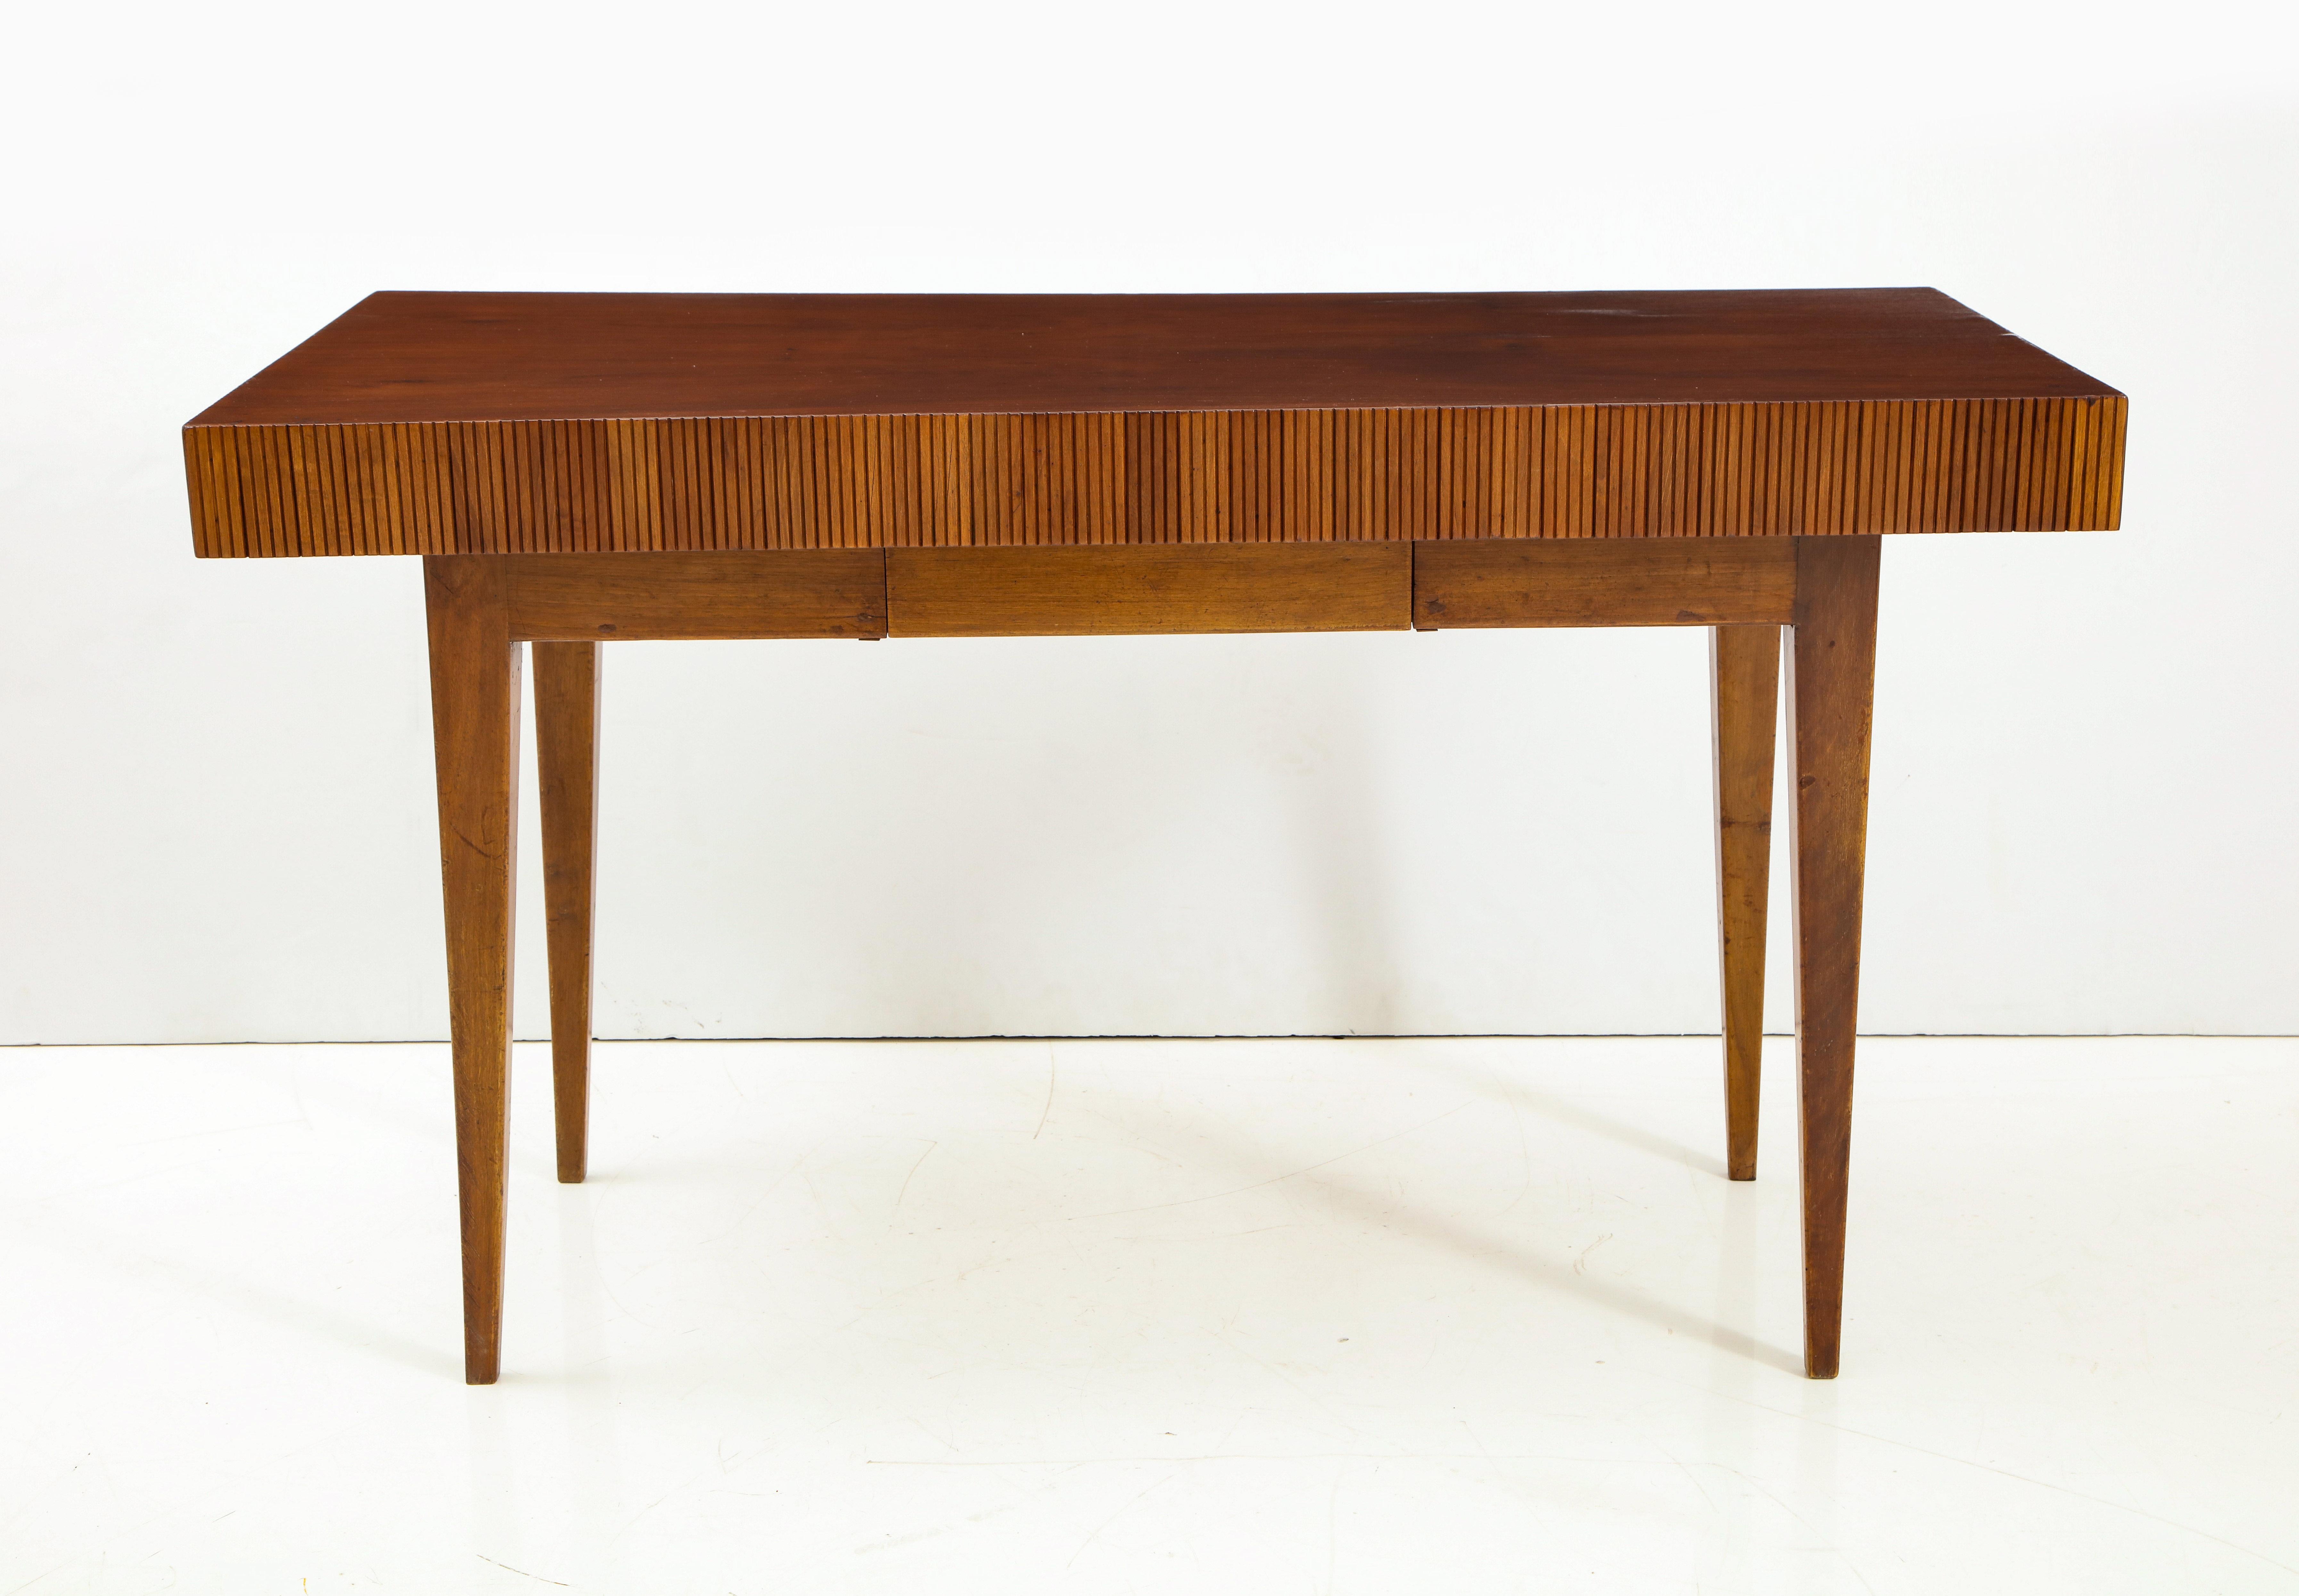 Italian walnut table or writing desk with extended floating top with a single drawer and reed carving on the apron surround, supported by elegant tapered legs.
In the Manner of Gio Ponti.
Italy, circa 1950.
Size: 31 1/2” high x 55” wide x 27 1/2”